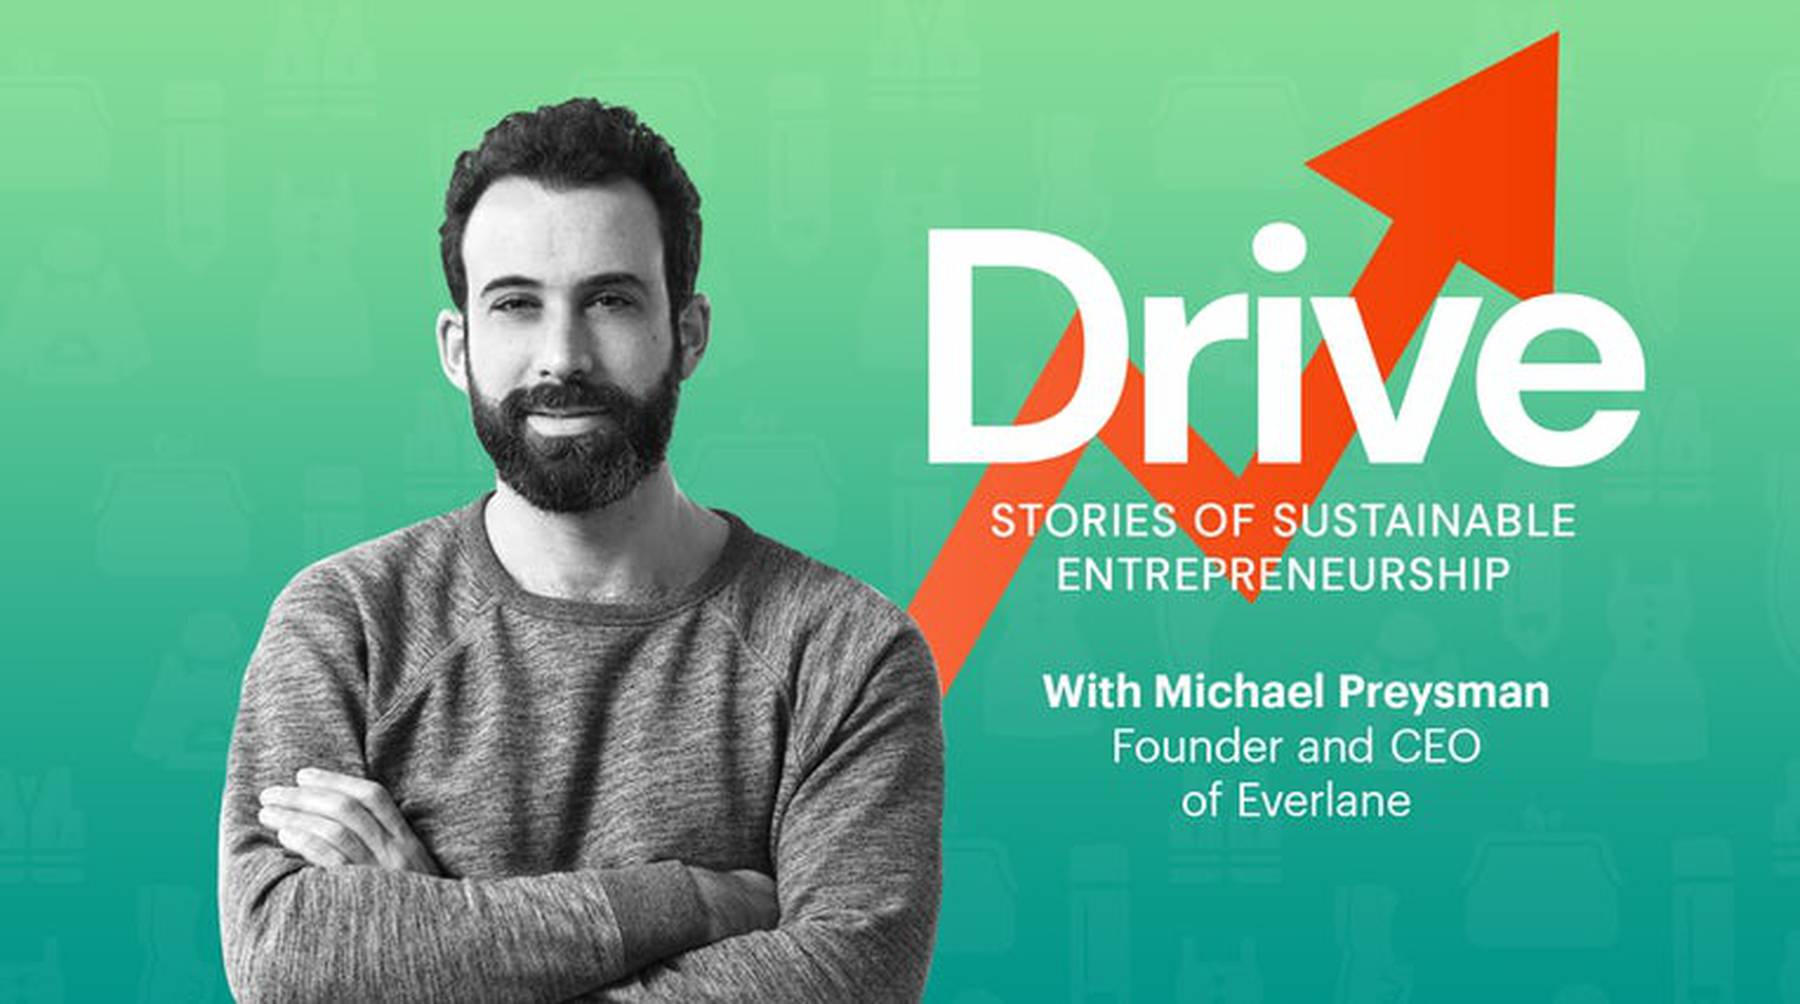 Michael Preysman, Founder and CEO of Everlane, for Drive.